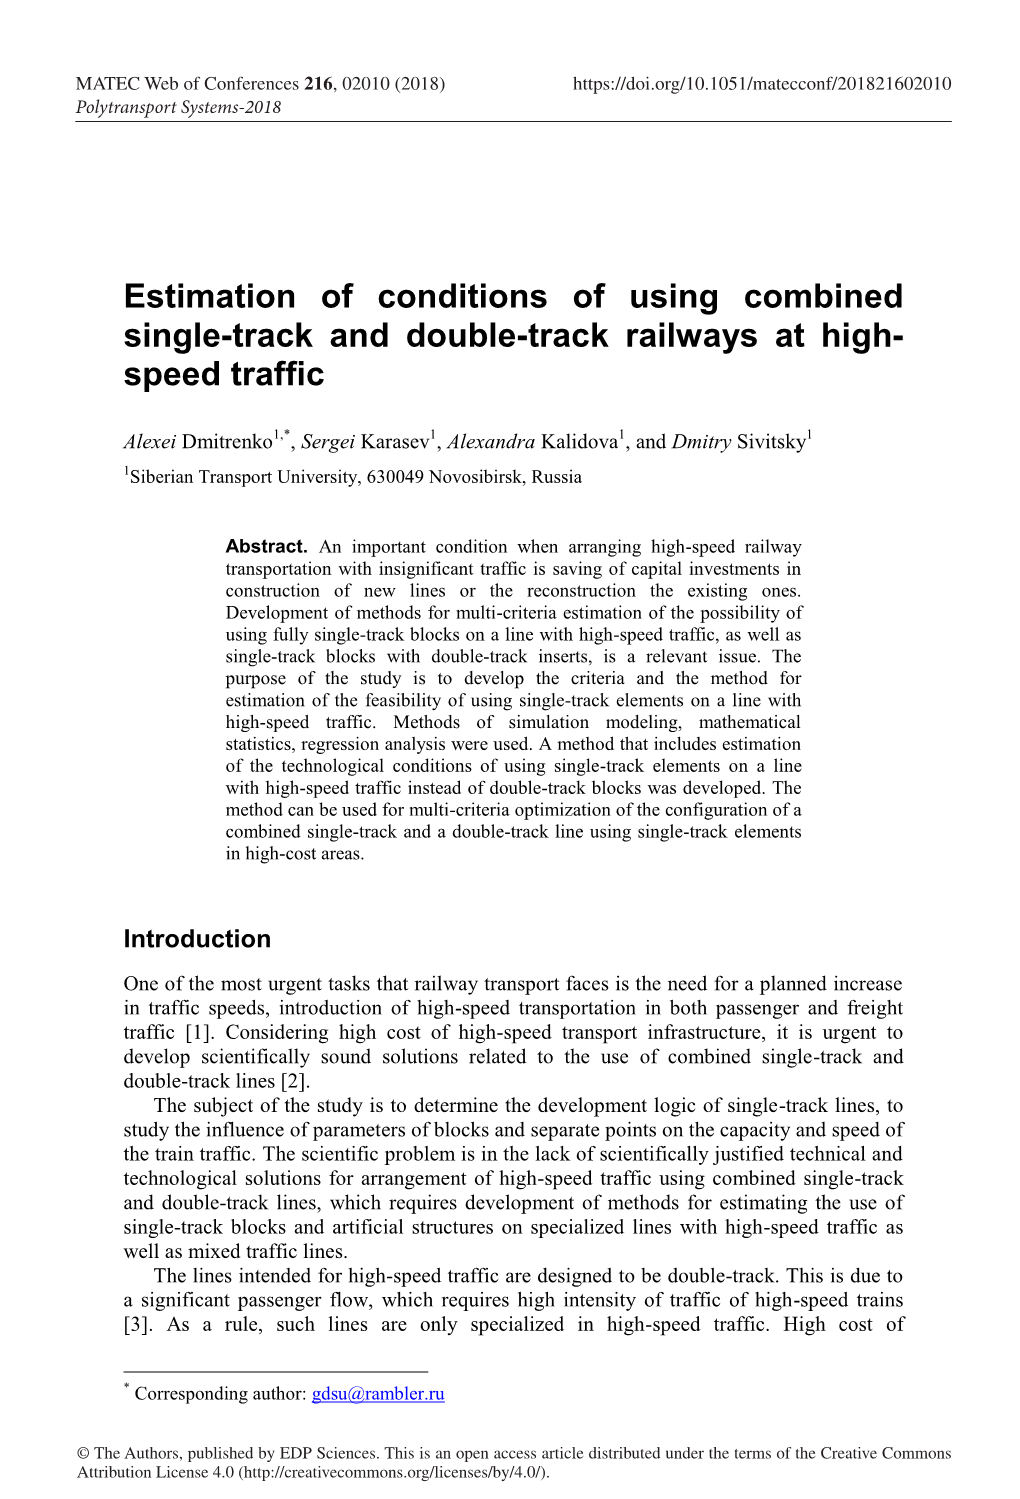 Estimation of Conditions of Using Combined Single-Track and Double-Track Railways at High- Speed Traffic